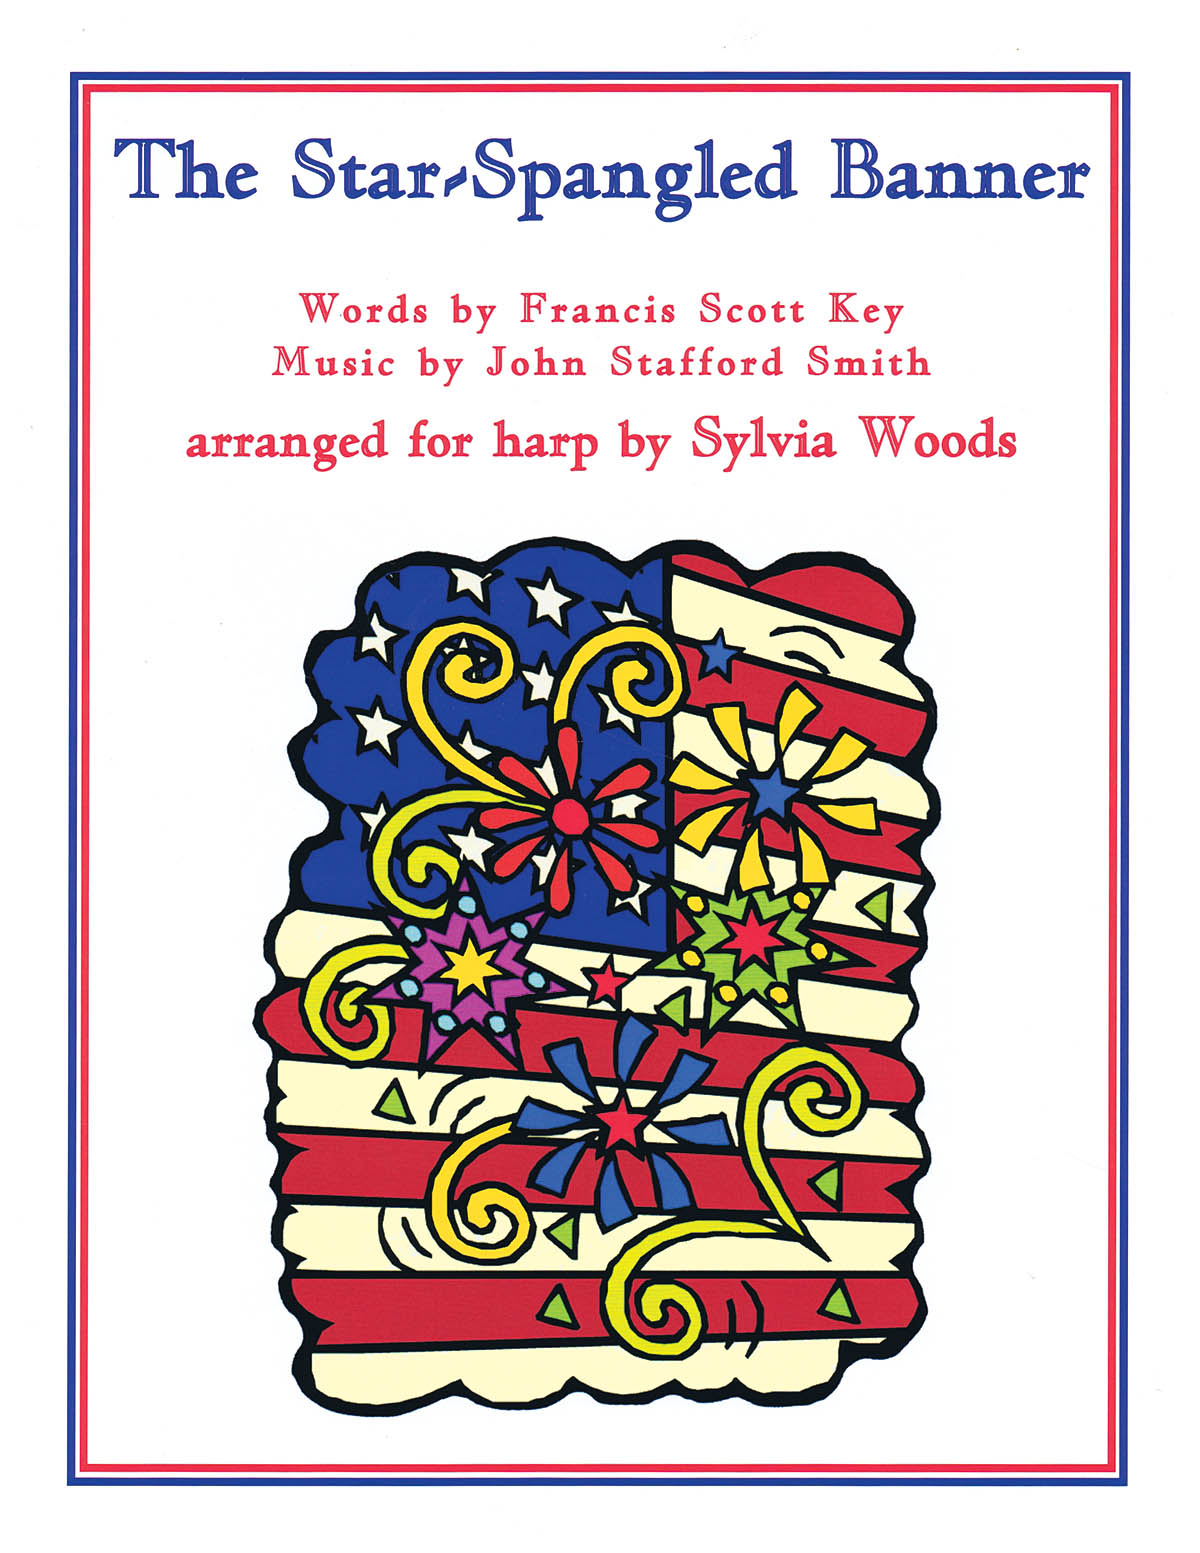 The Star-Spangled Banner fuer Harp